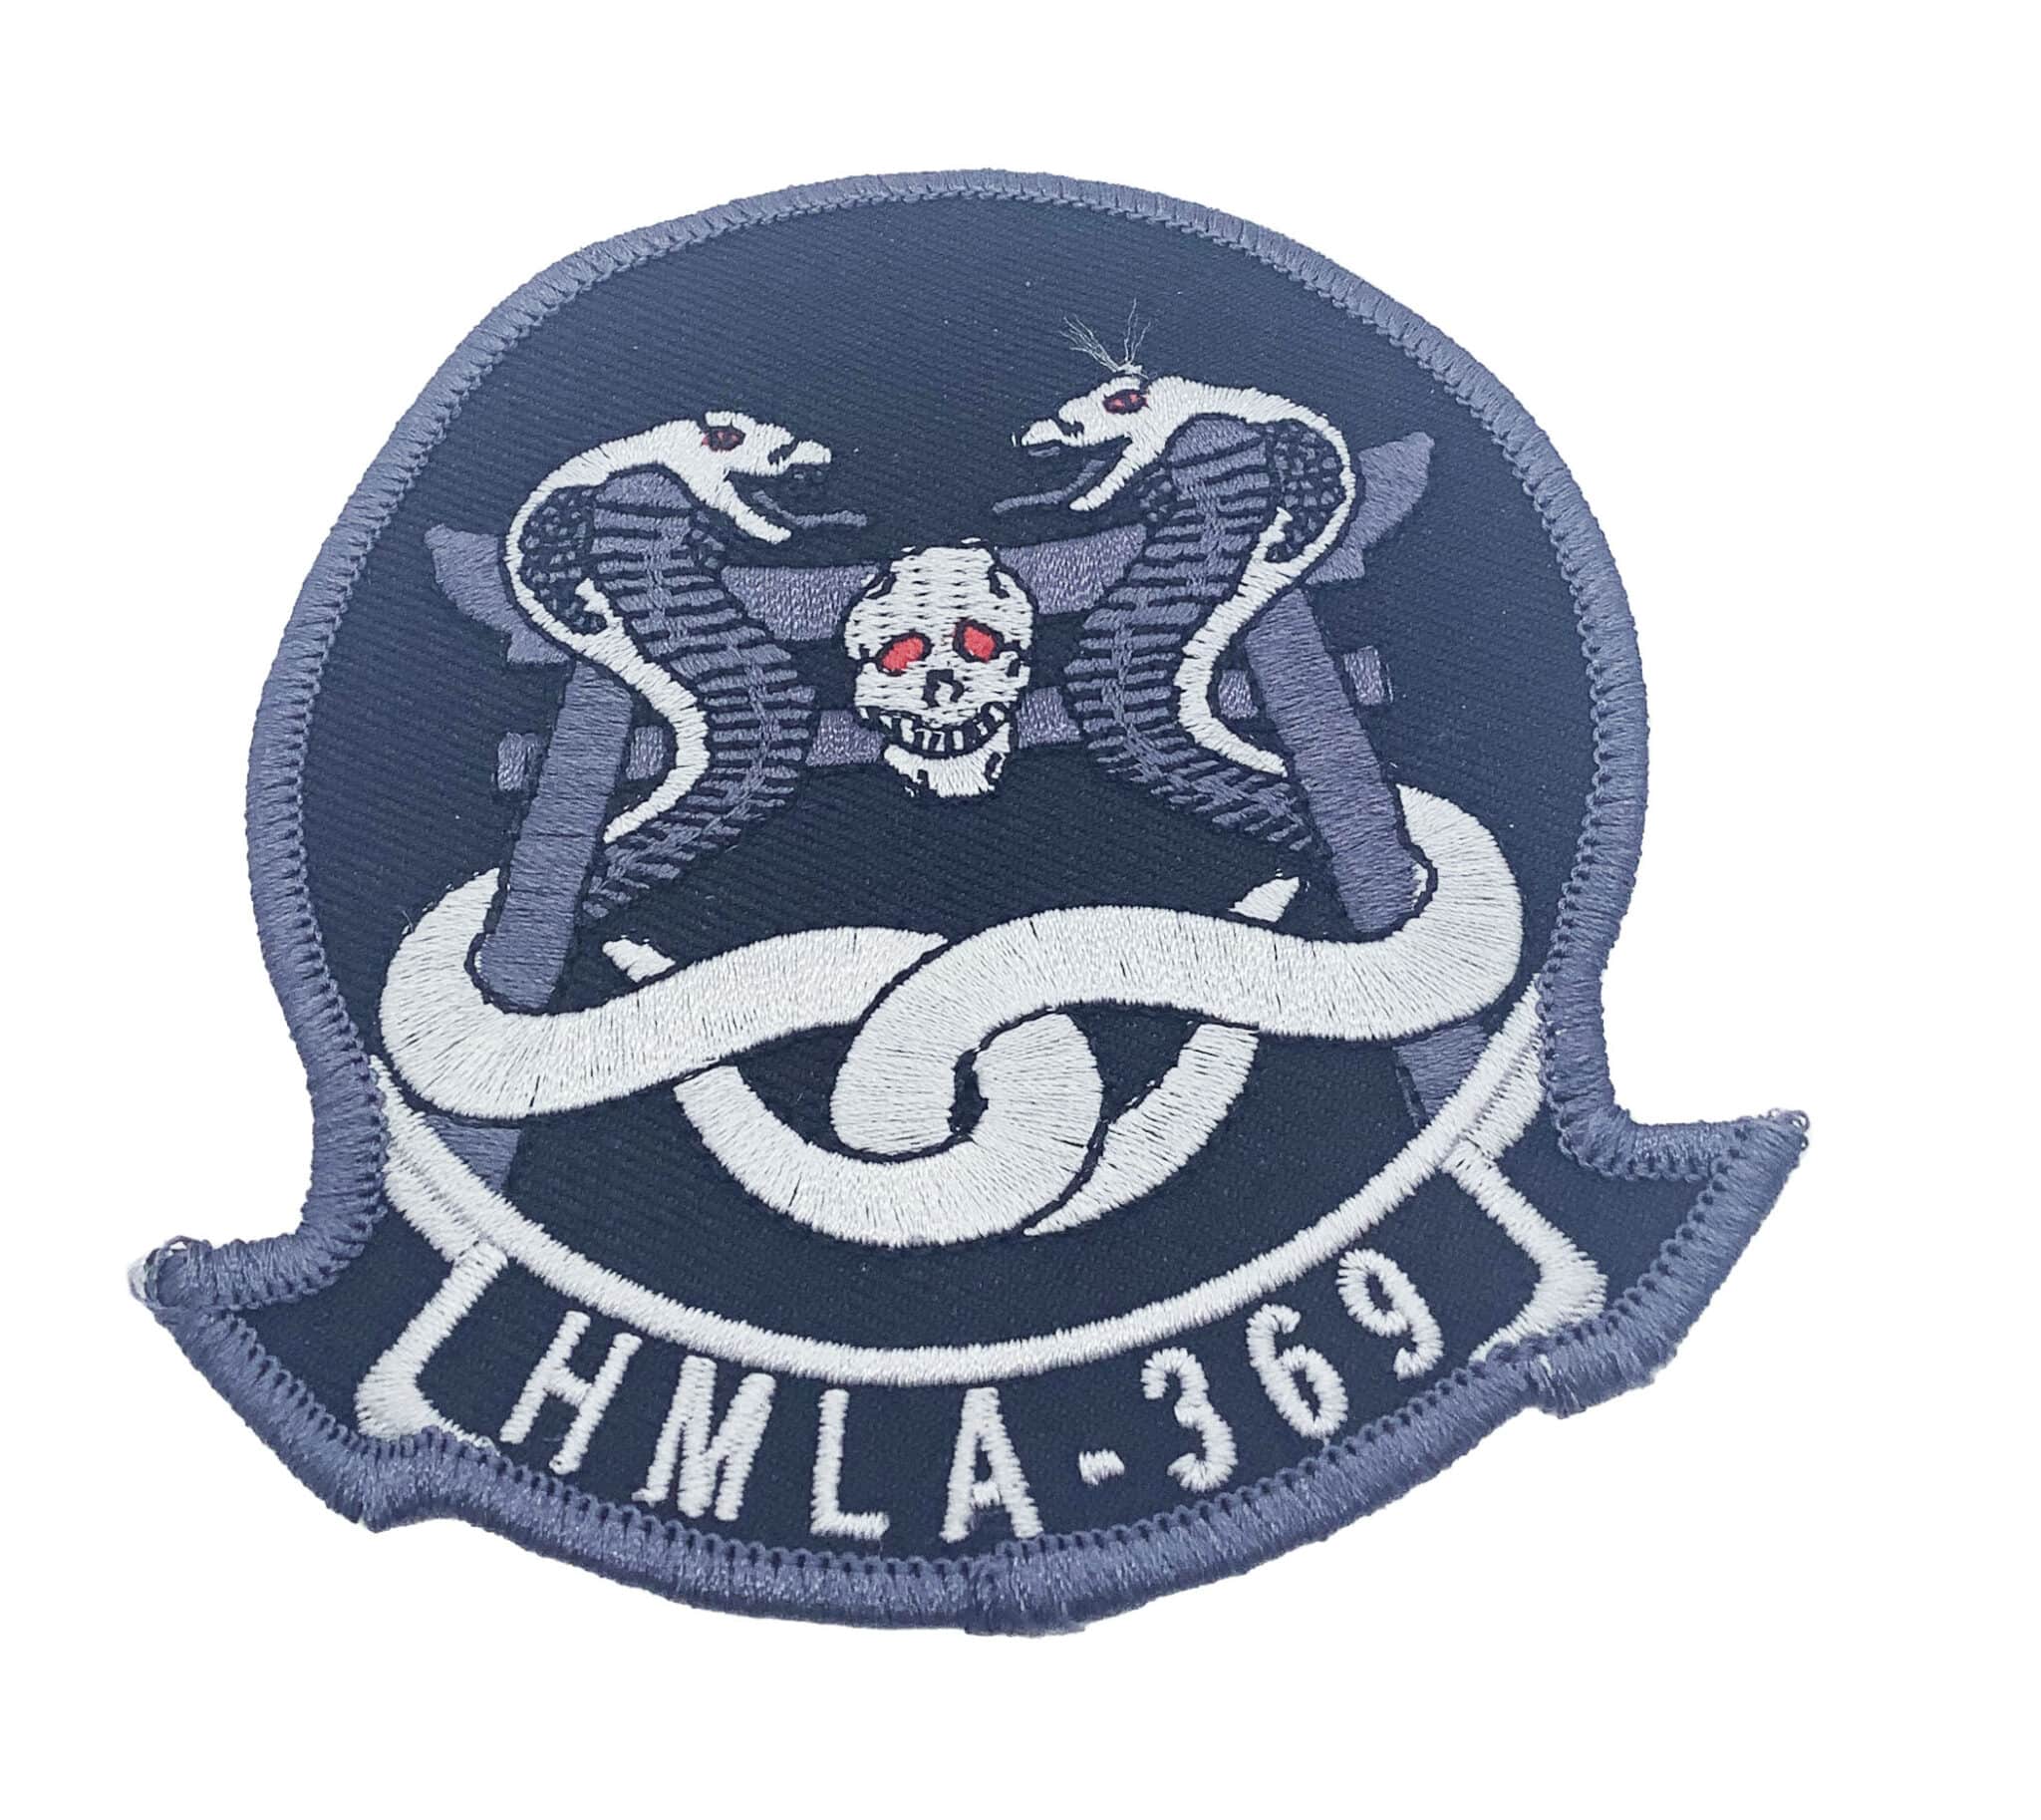 HMLA-369 Gunfighters Black Squadron Patch – With Hook and Loop